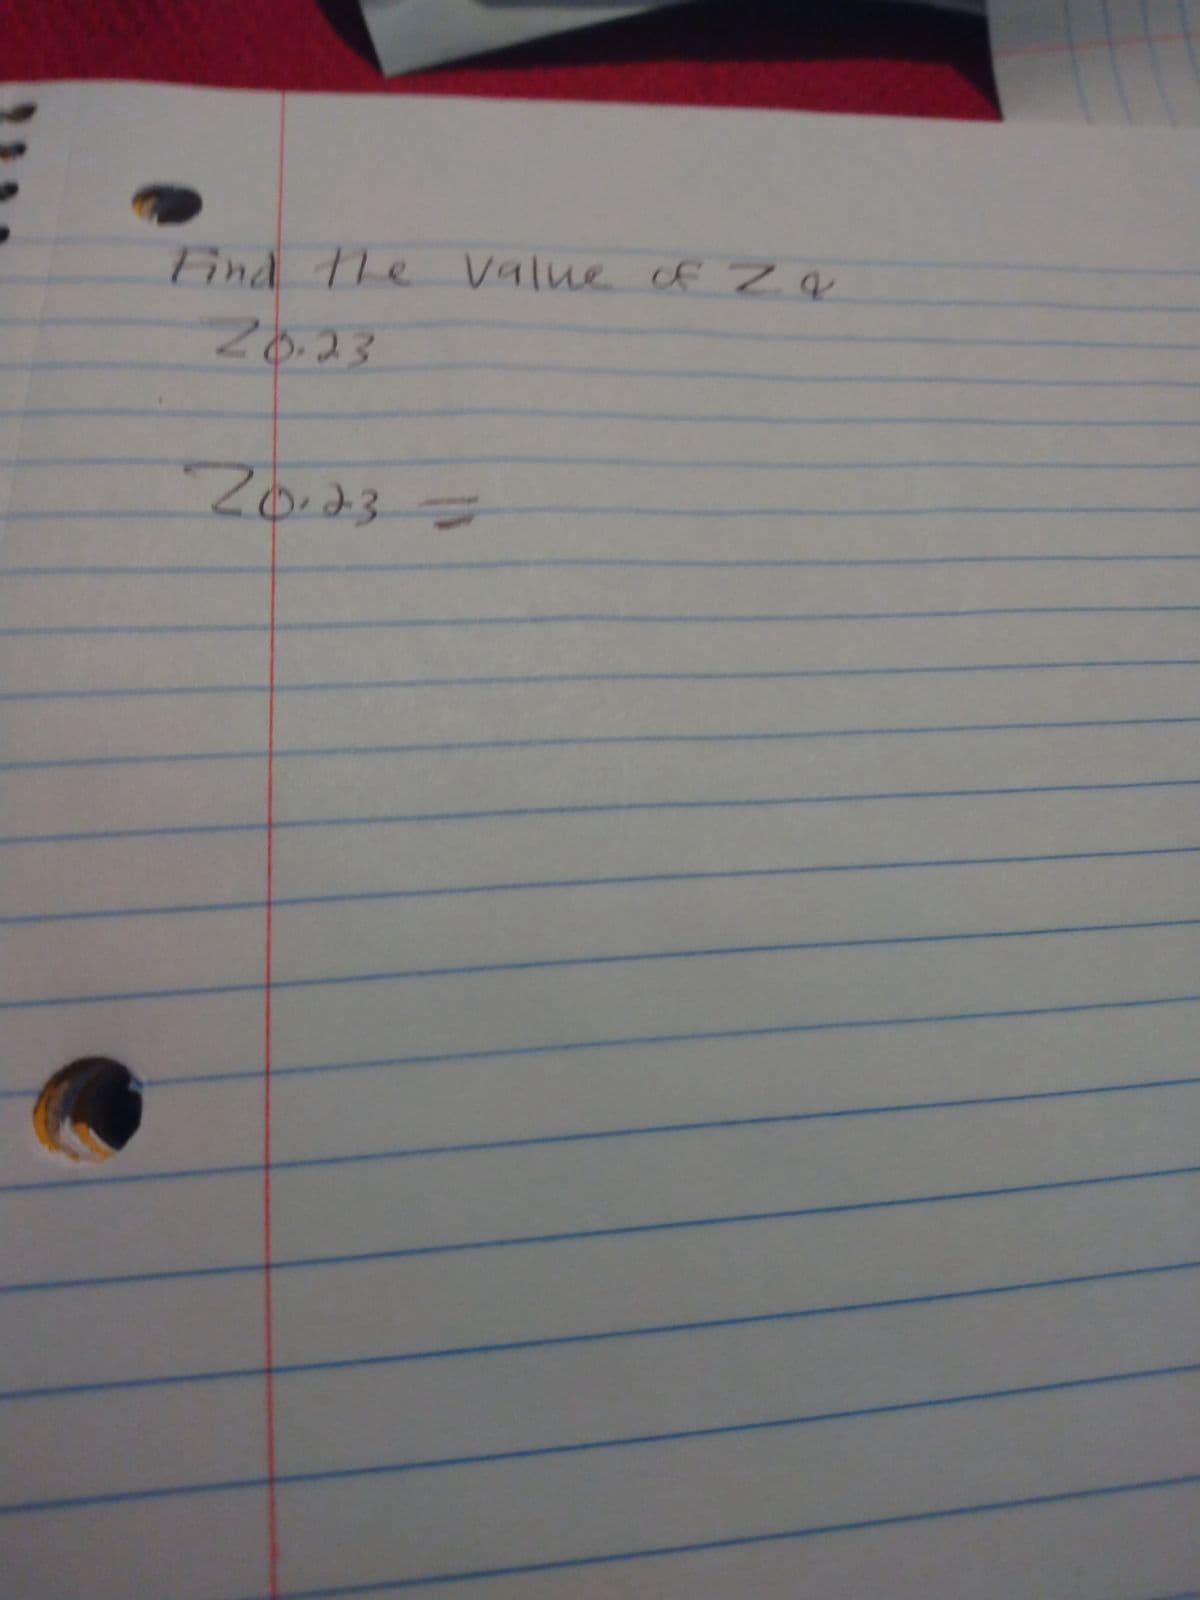 Find the value of Za
20.23
20.23=